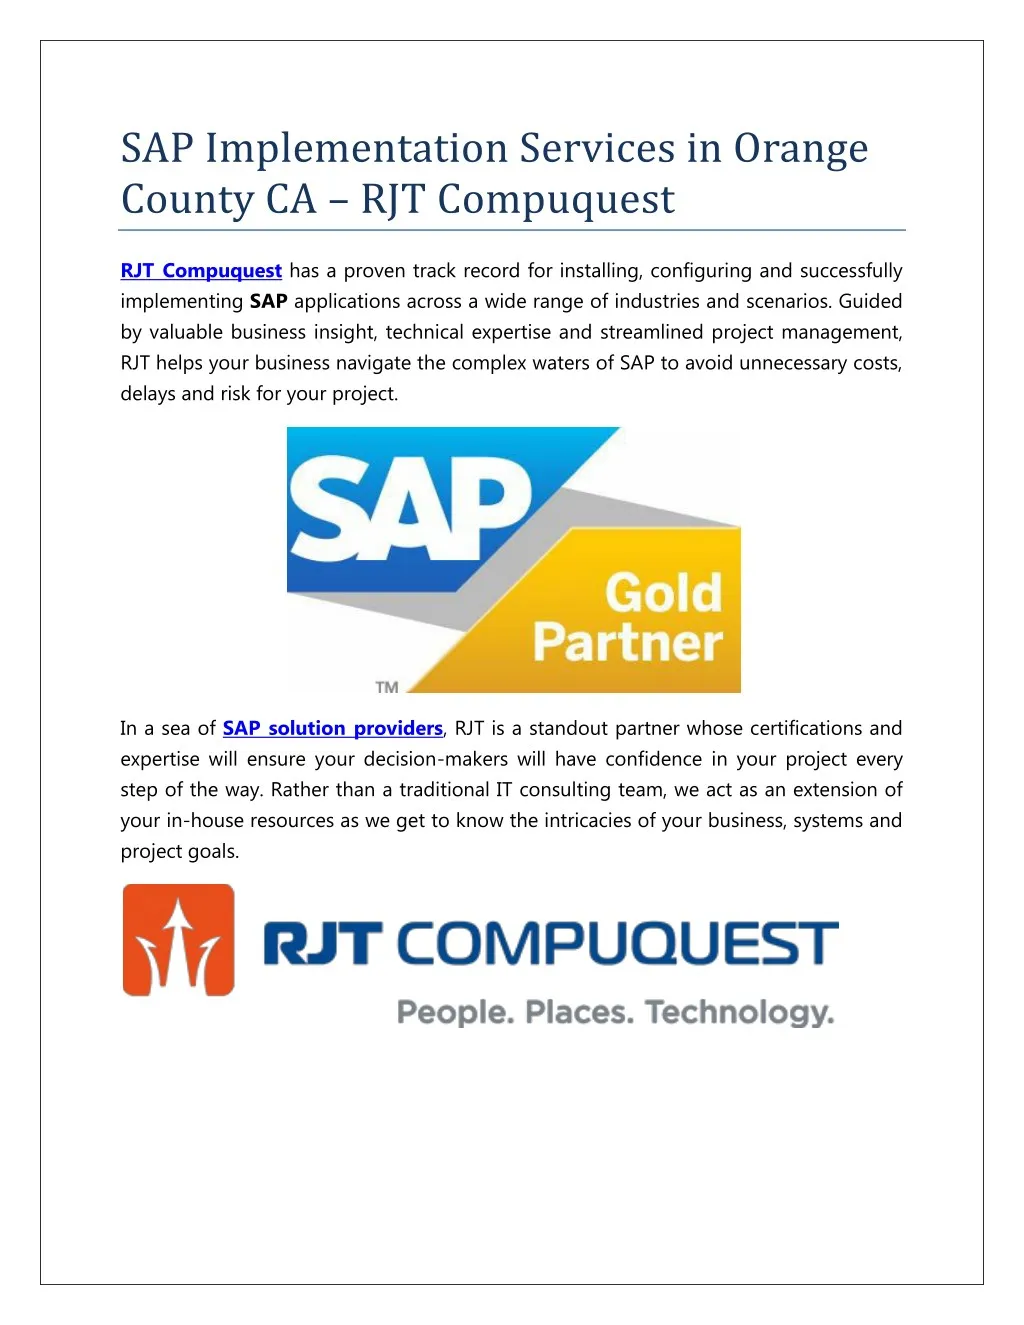 sap implementation services in orange county